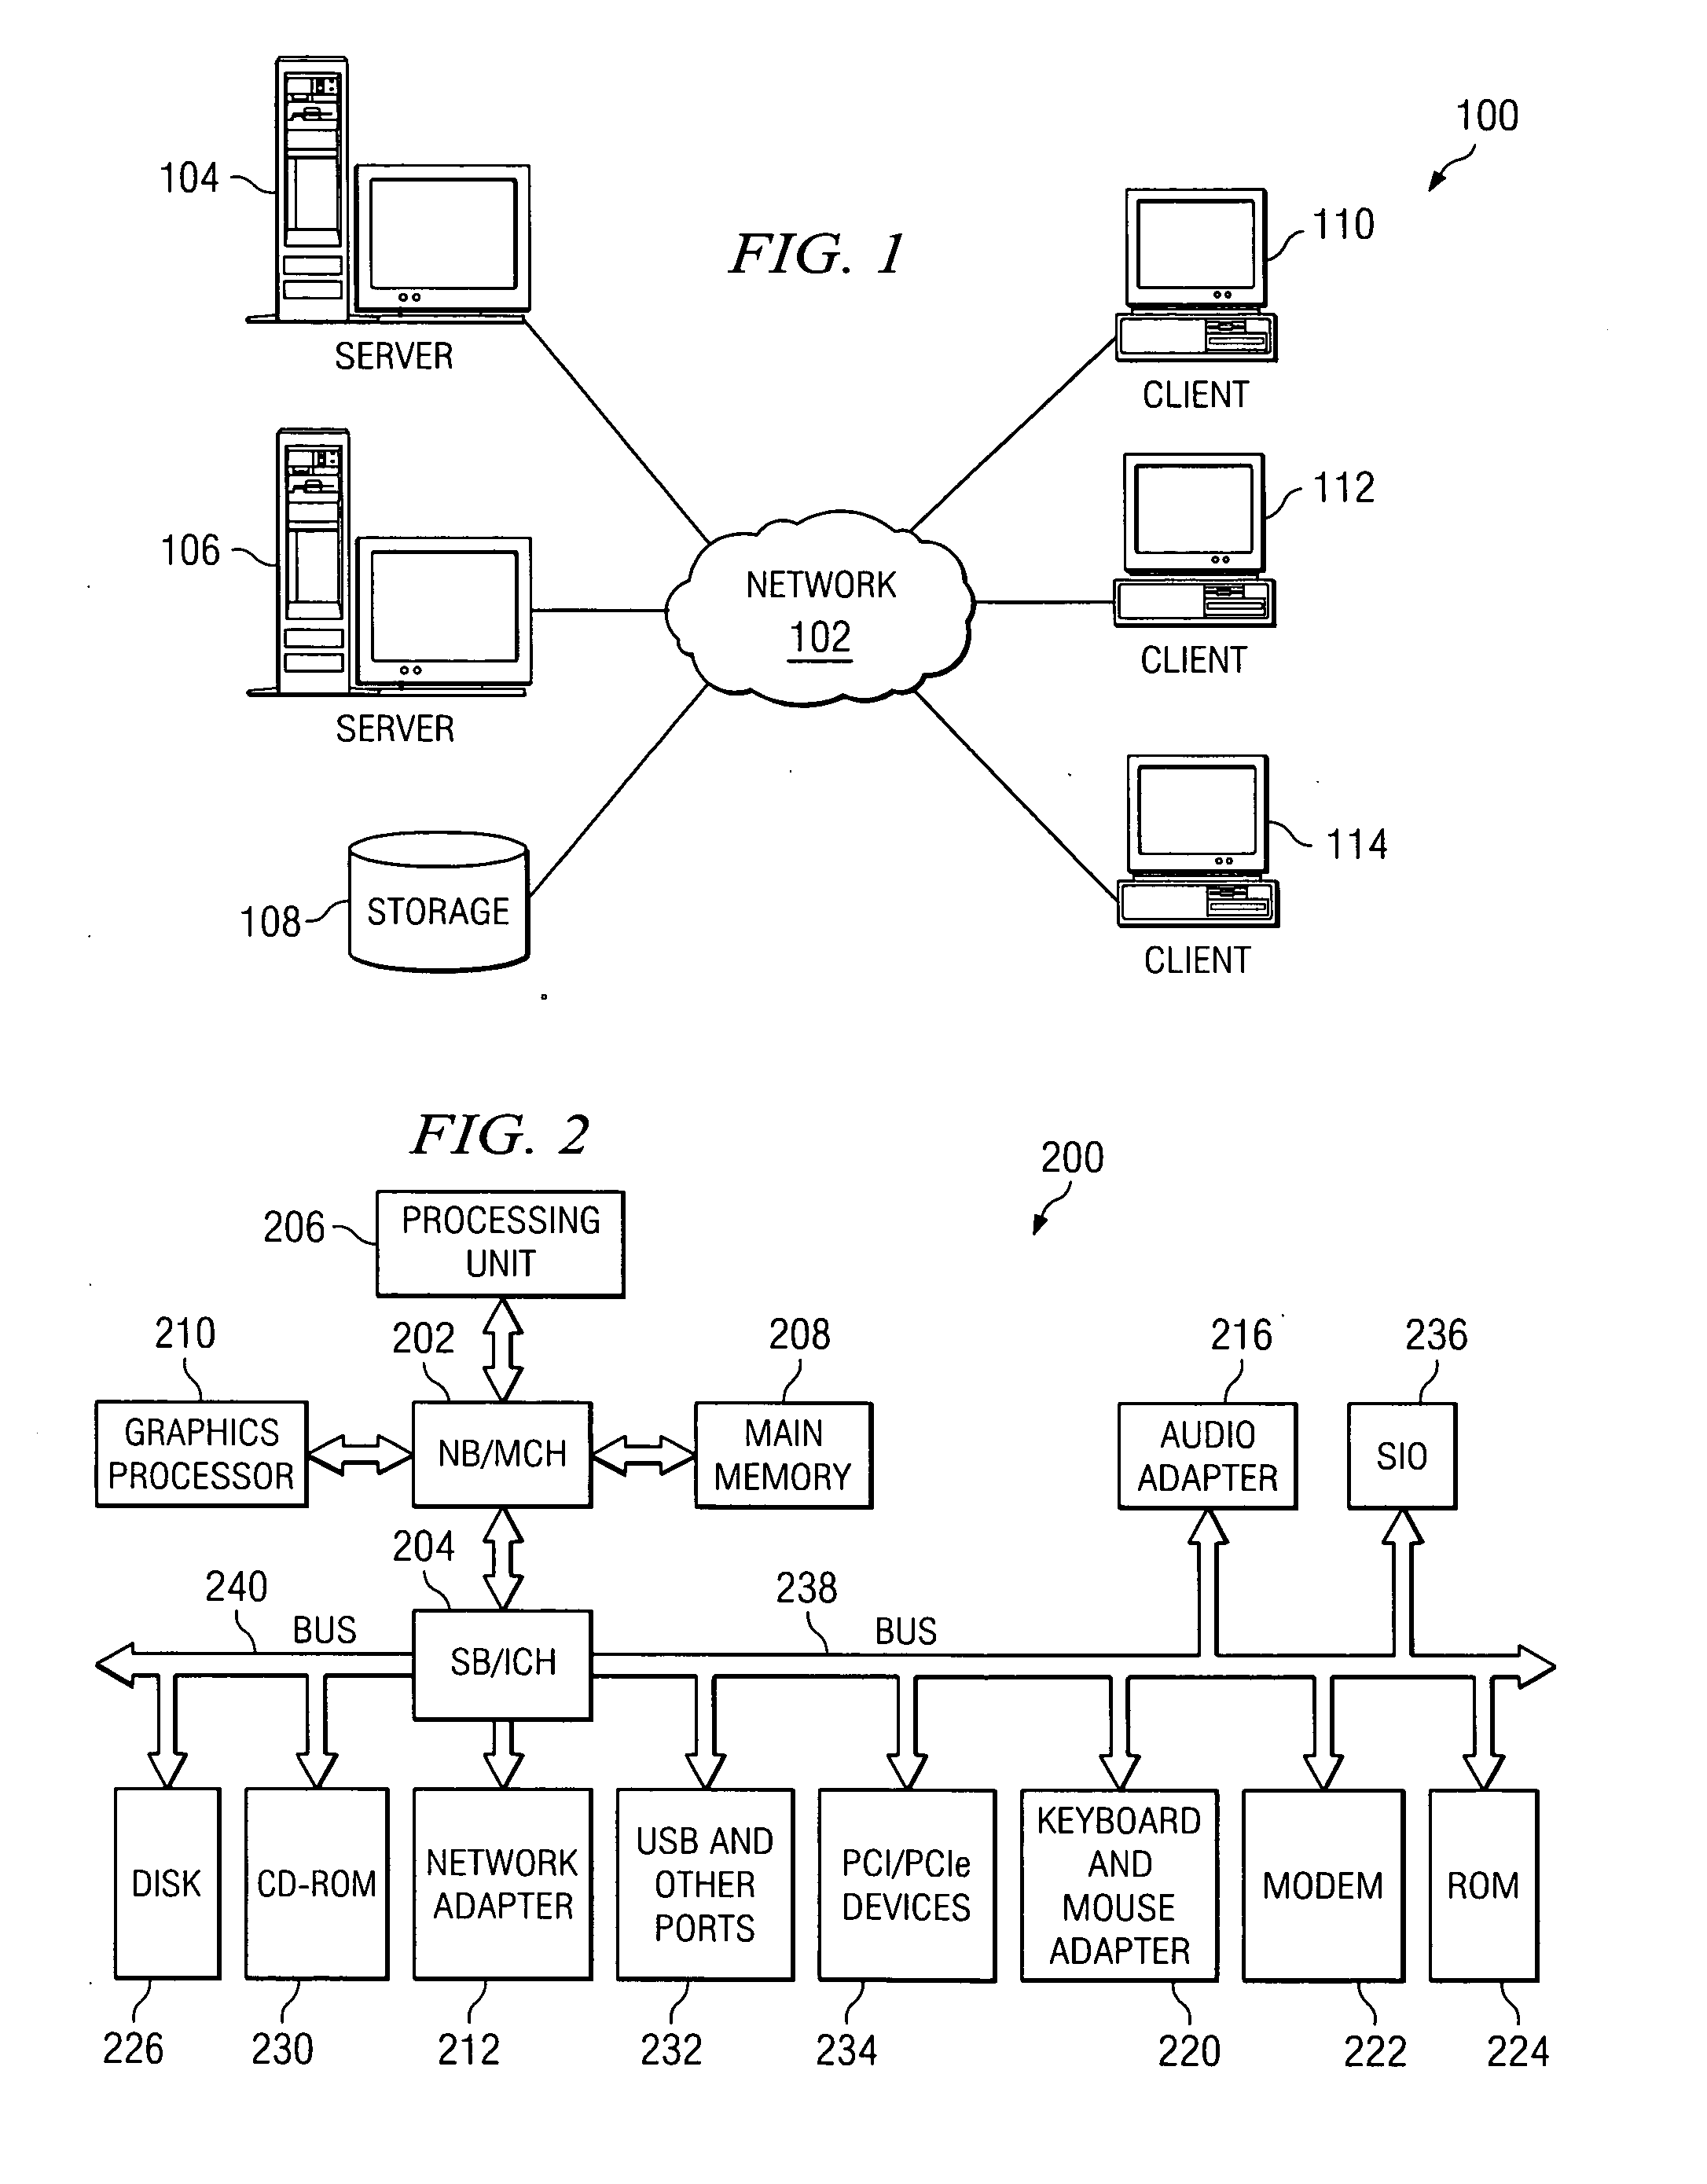 Generation of software thermal profiles executed on a set of processors using processor activity